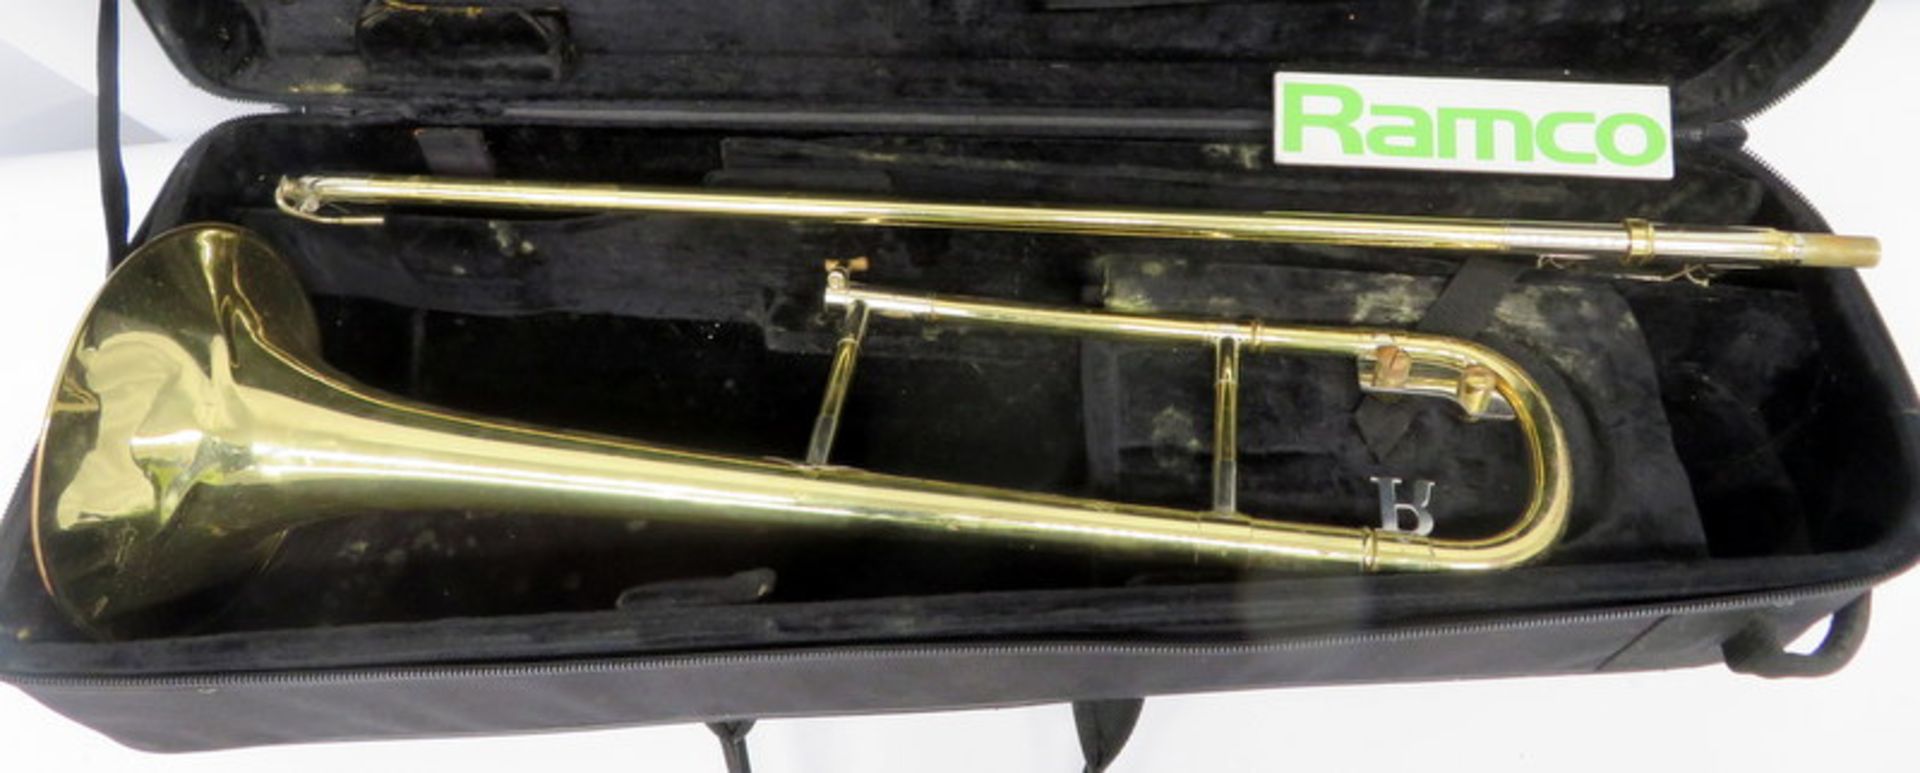 Rath R3 Trombone With Case. Serial Number:028.Please Note That This Item Has Not Be Tested - Image 2 of 15